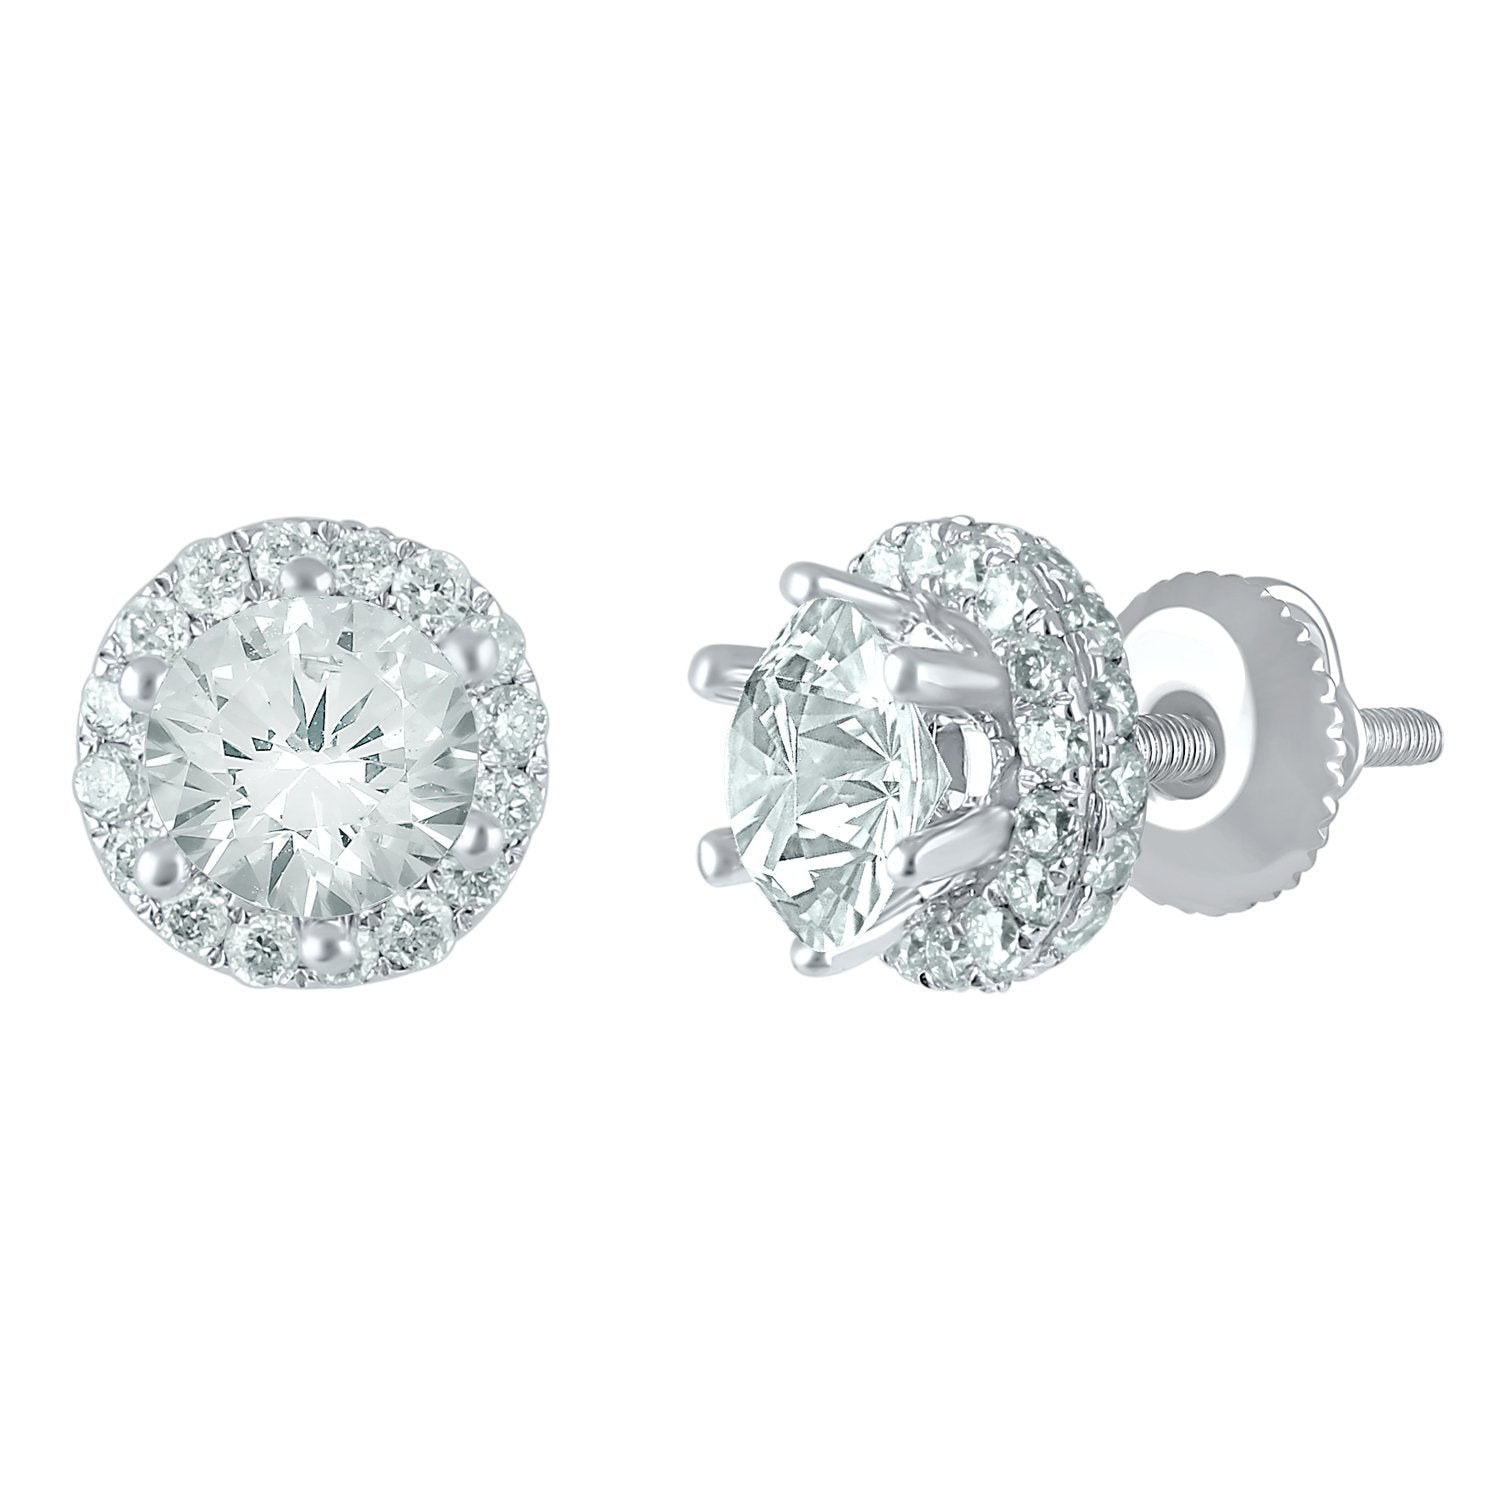 Love by Michelle Beville Halo Solitaire Earrings with 0.65ct of Diamonds in 18ct White Gold Earrings Bevilles 